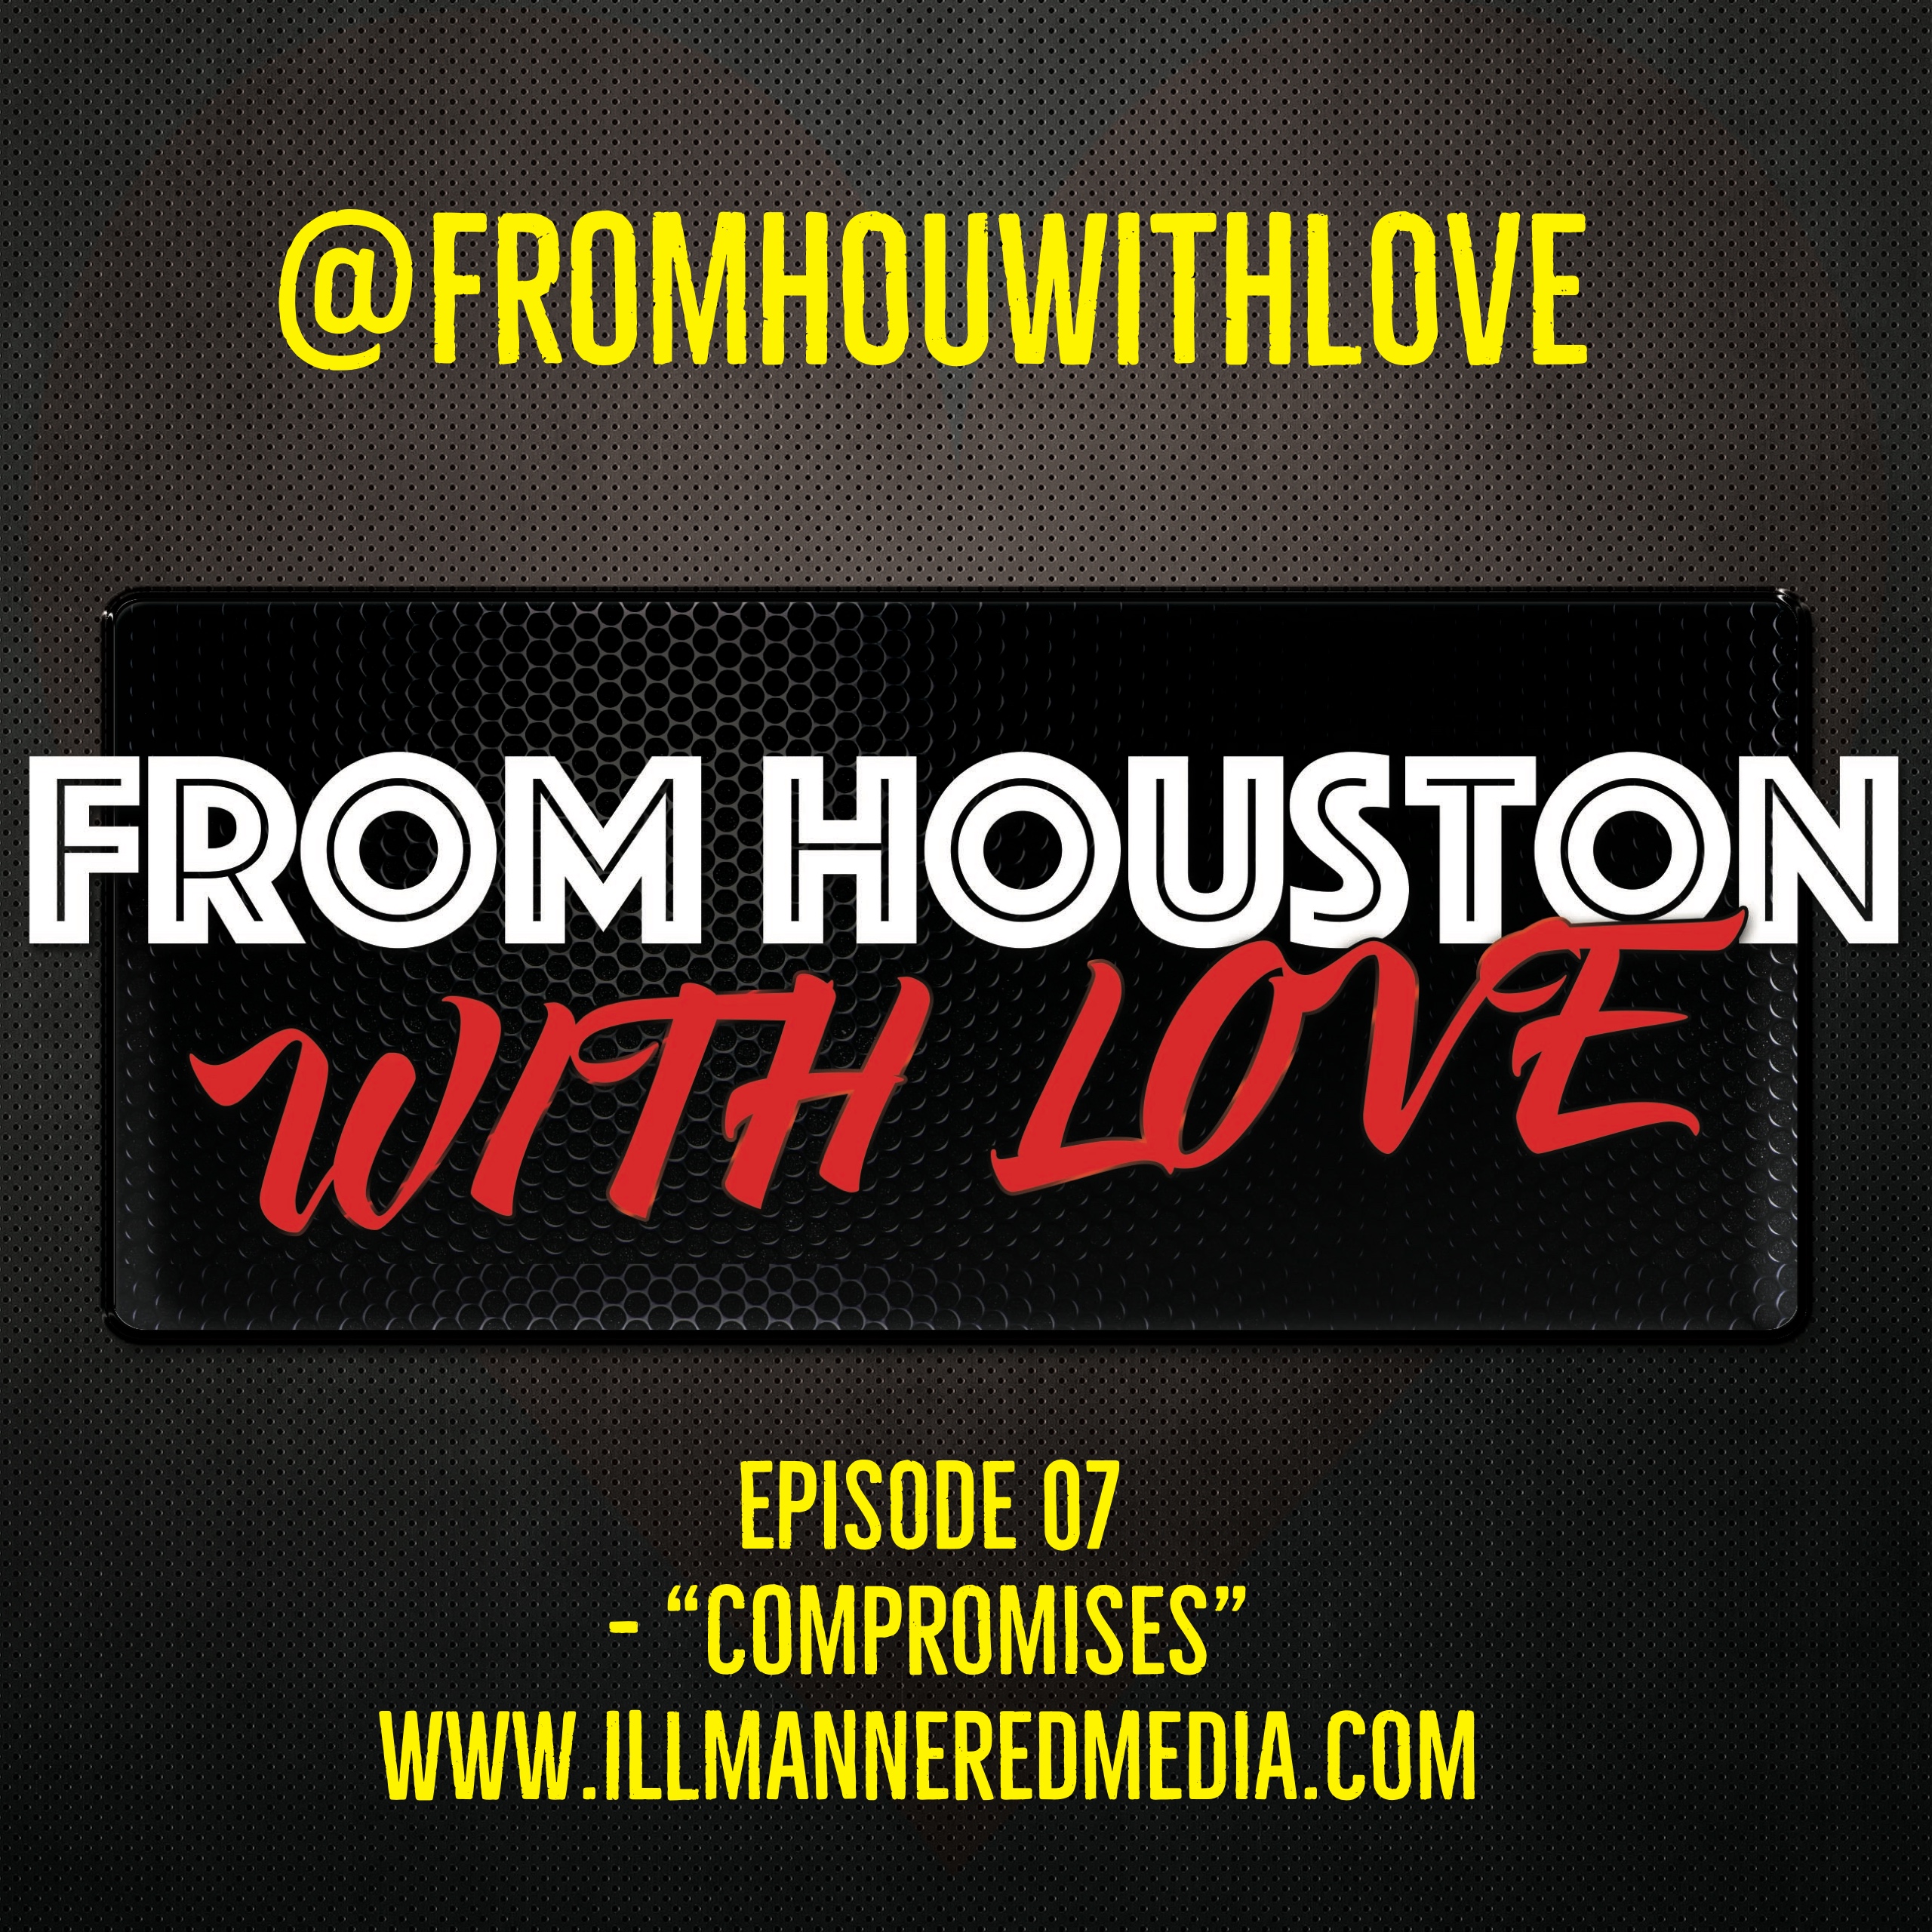 From Houston With Love (Podcast): Episode 07 – “Compromises”